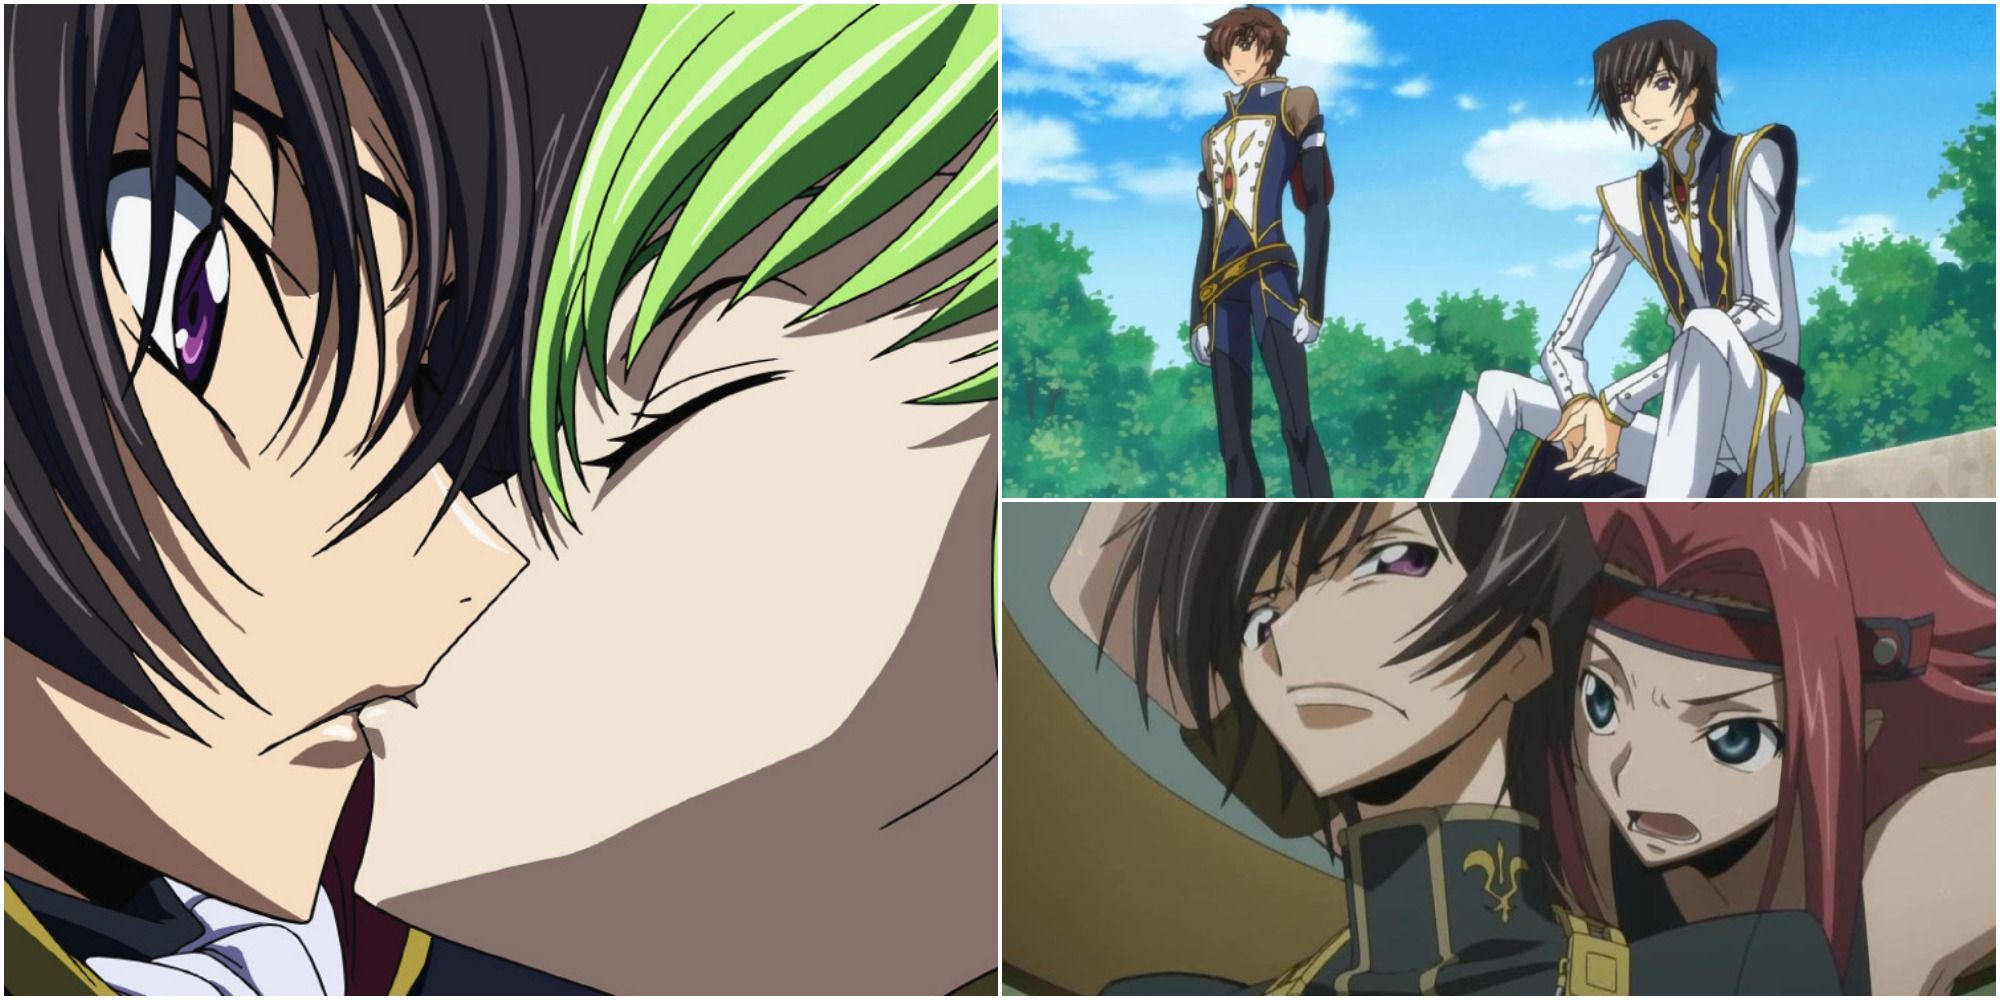 The Main Character and Villain, Lelouch Lamperouge